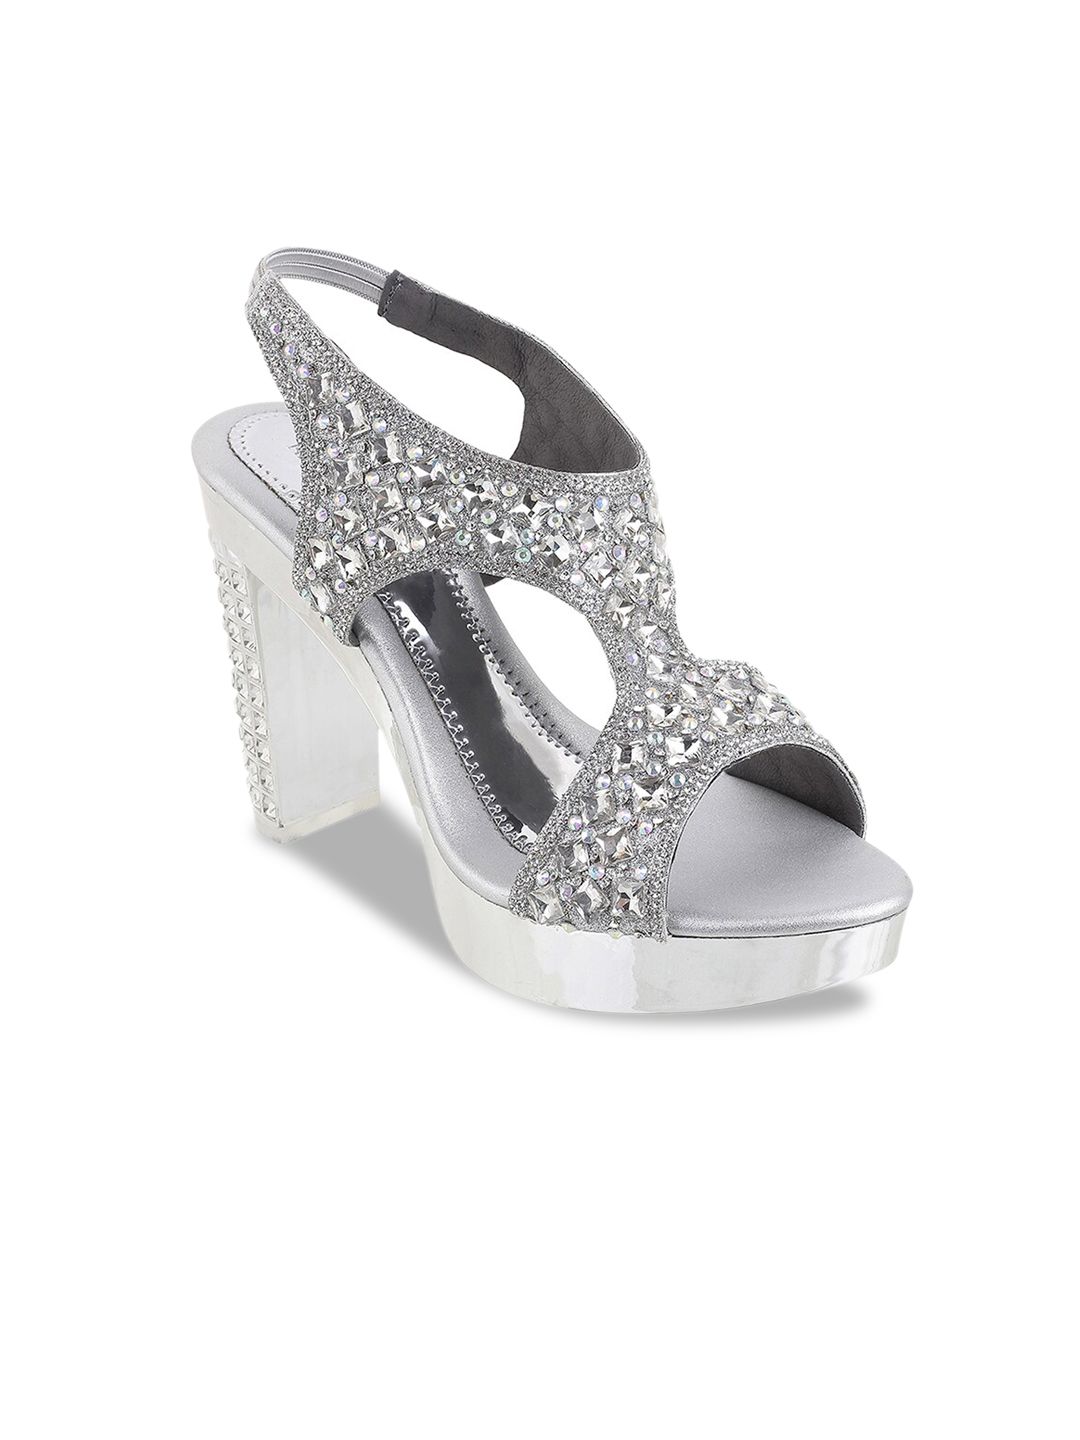 Mochi Silver-Toned Embellished Platform with Laser Cuts Price in India